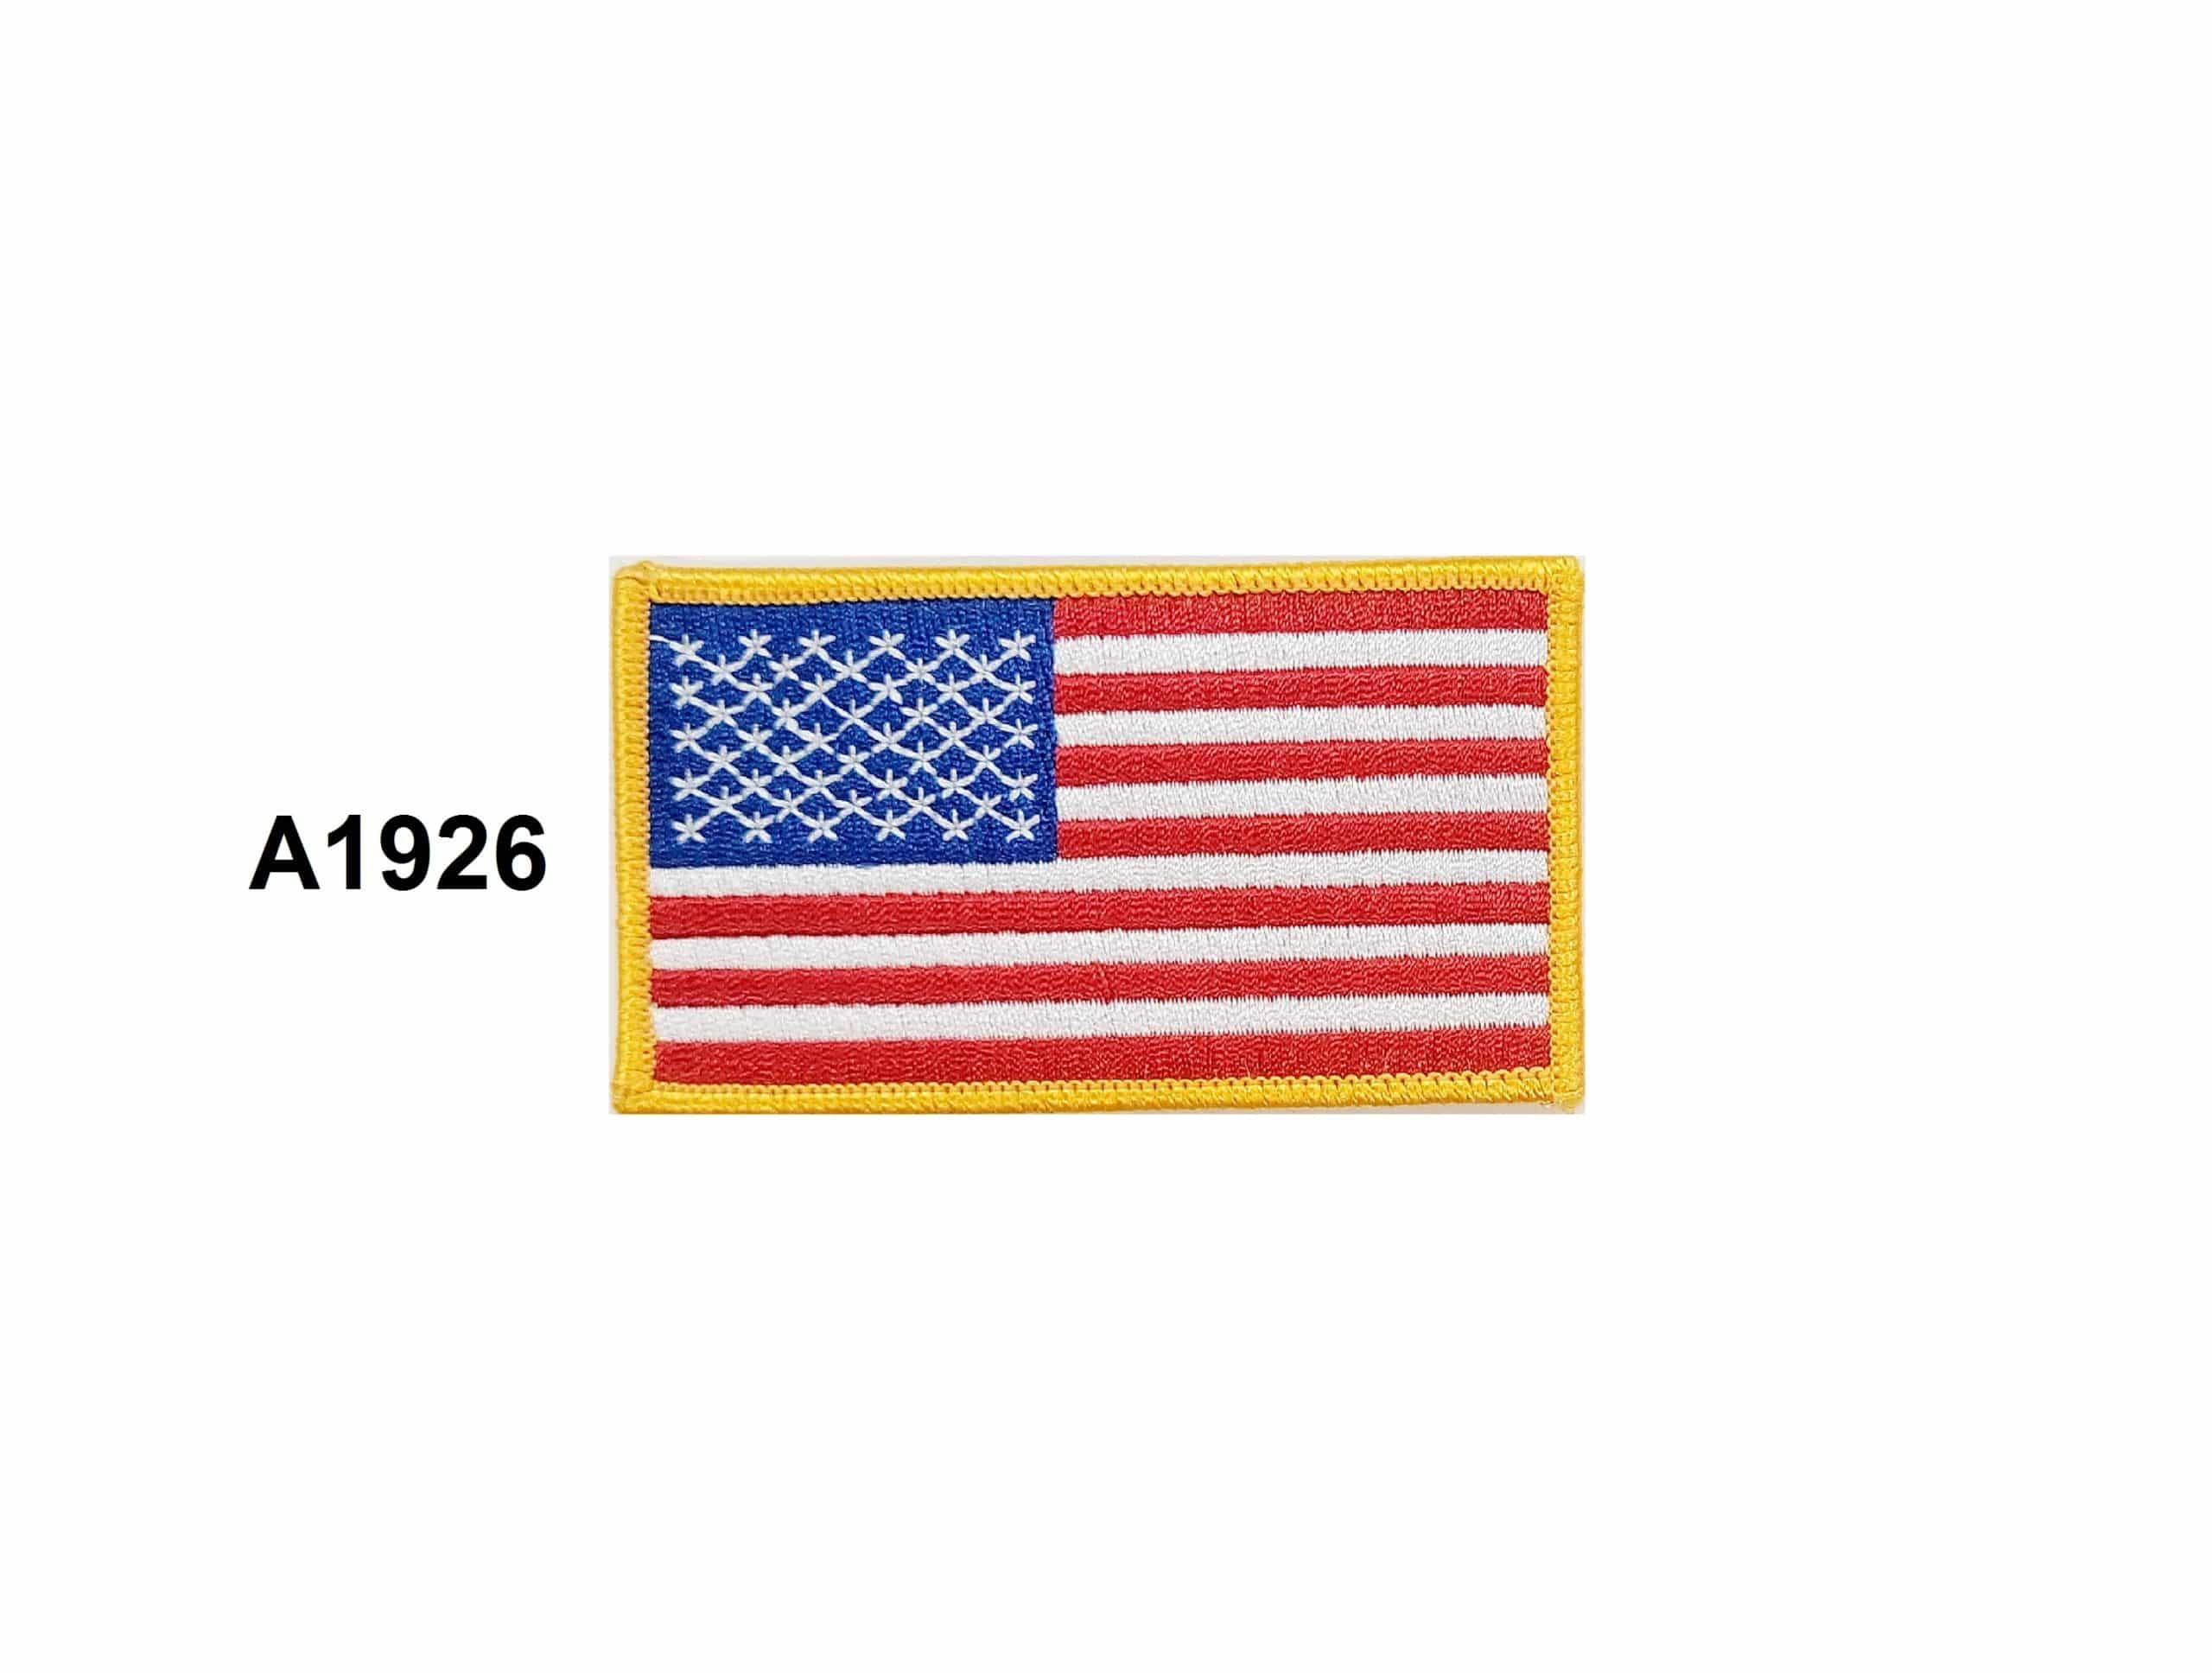 Reverse Gold Border American Flag Embroidered Patch